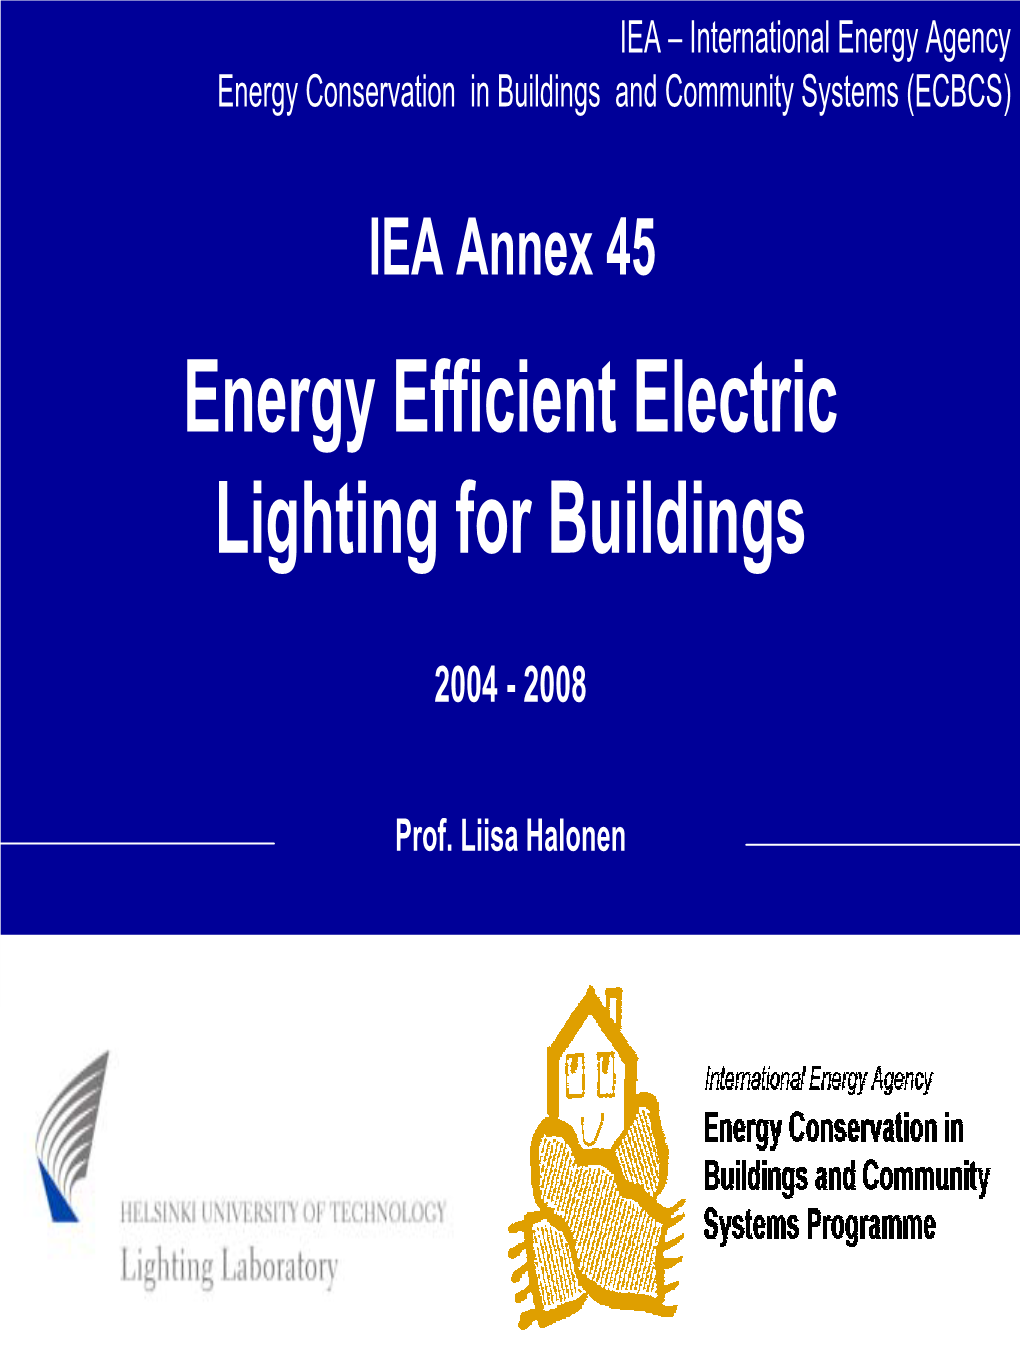 Energy Efficient Electric Lighting for Buildings